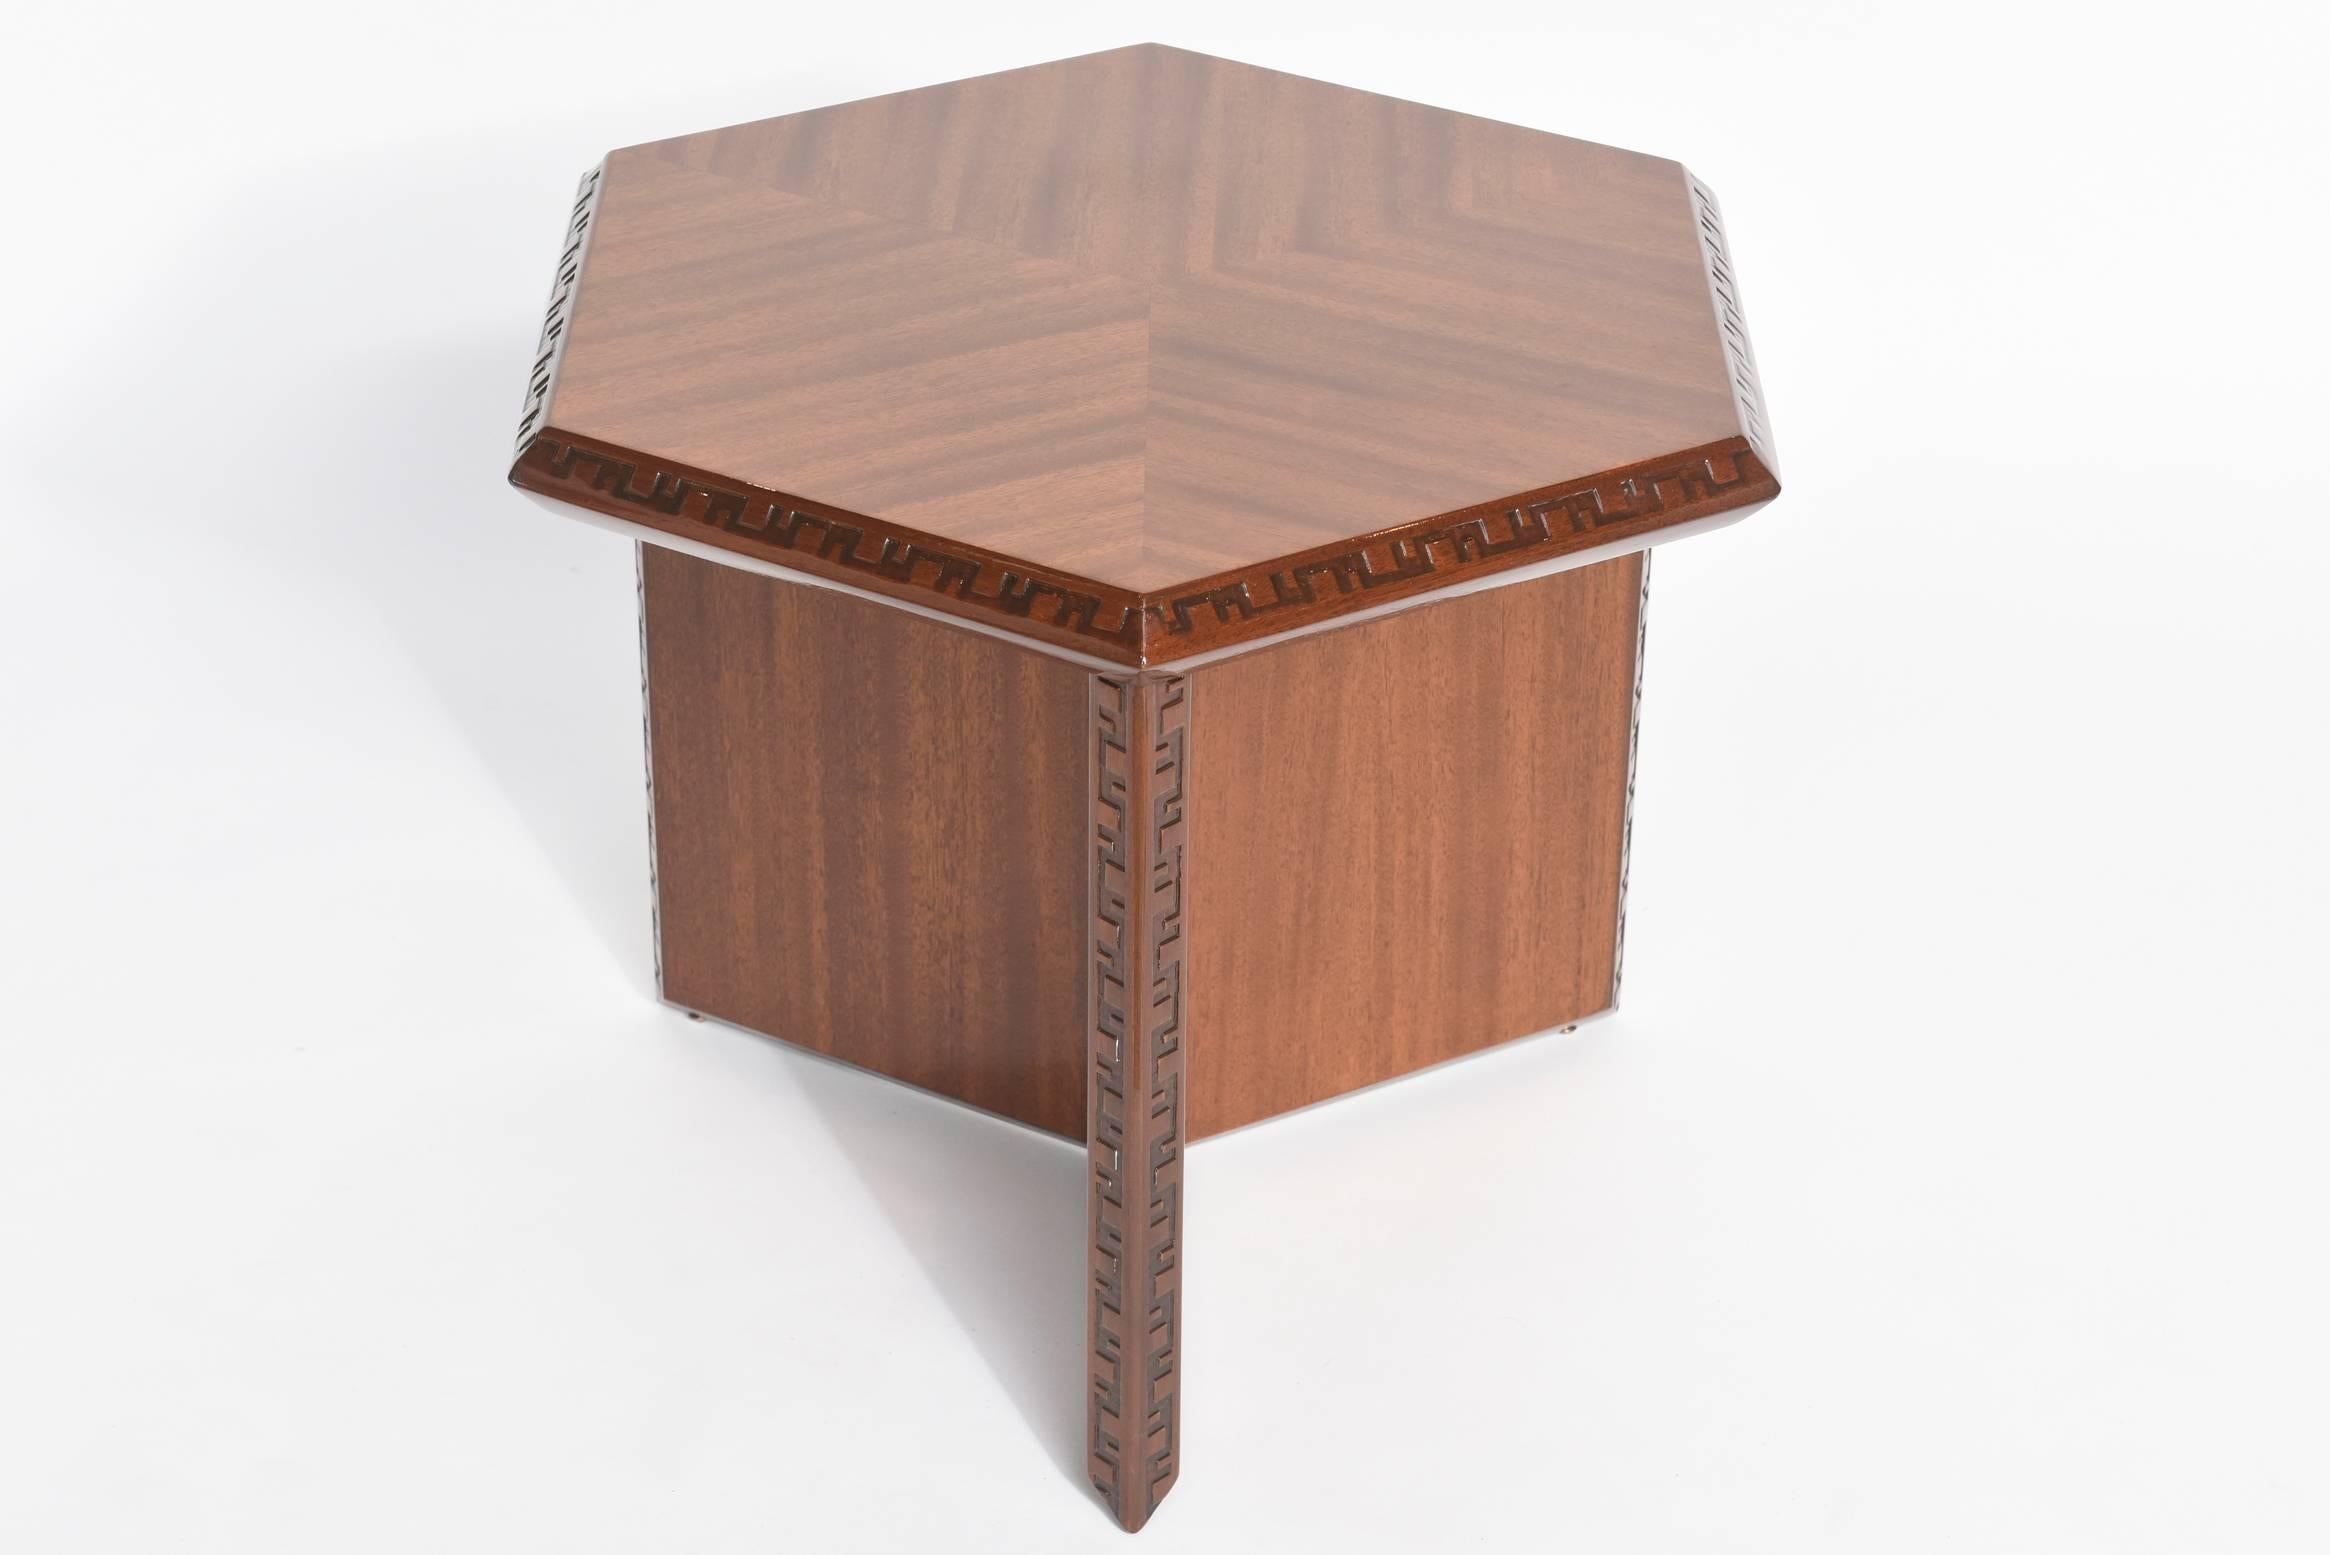 The hexagonal top with modified Greek key motif on conforming base with similar Greek key motif
Frank Lloyd Wright for Heritage Henredon.